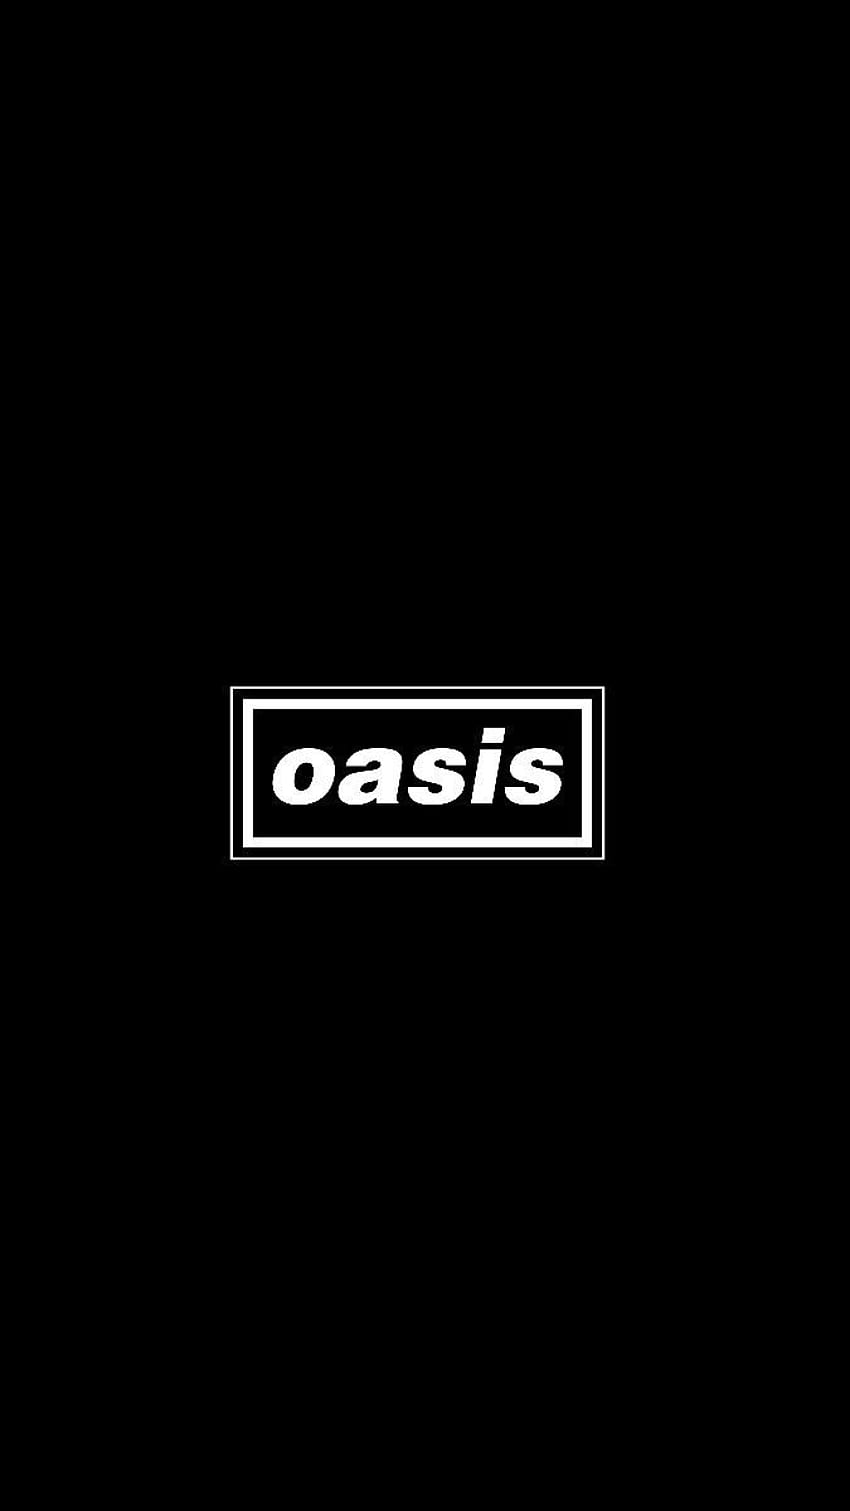 Discover and share the most beautiful from around the world. Oasis band, Oasis logo, Oasis album, Cool Oasis HD phone wallpaper